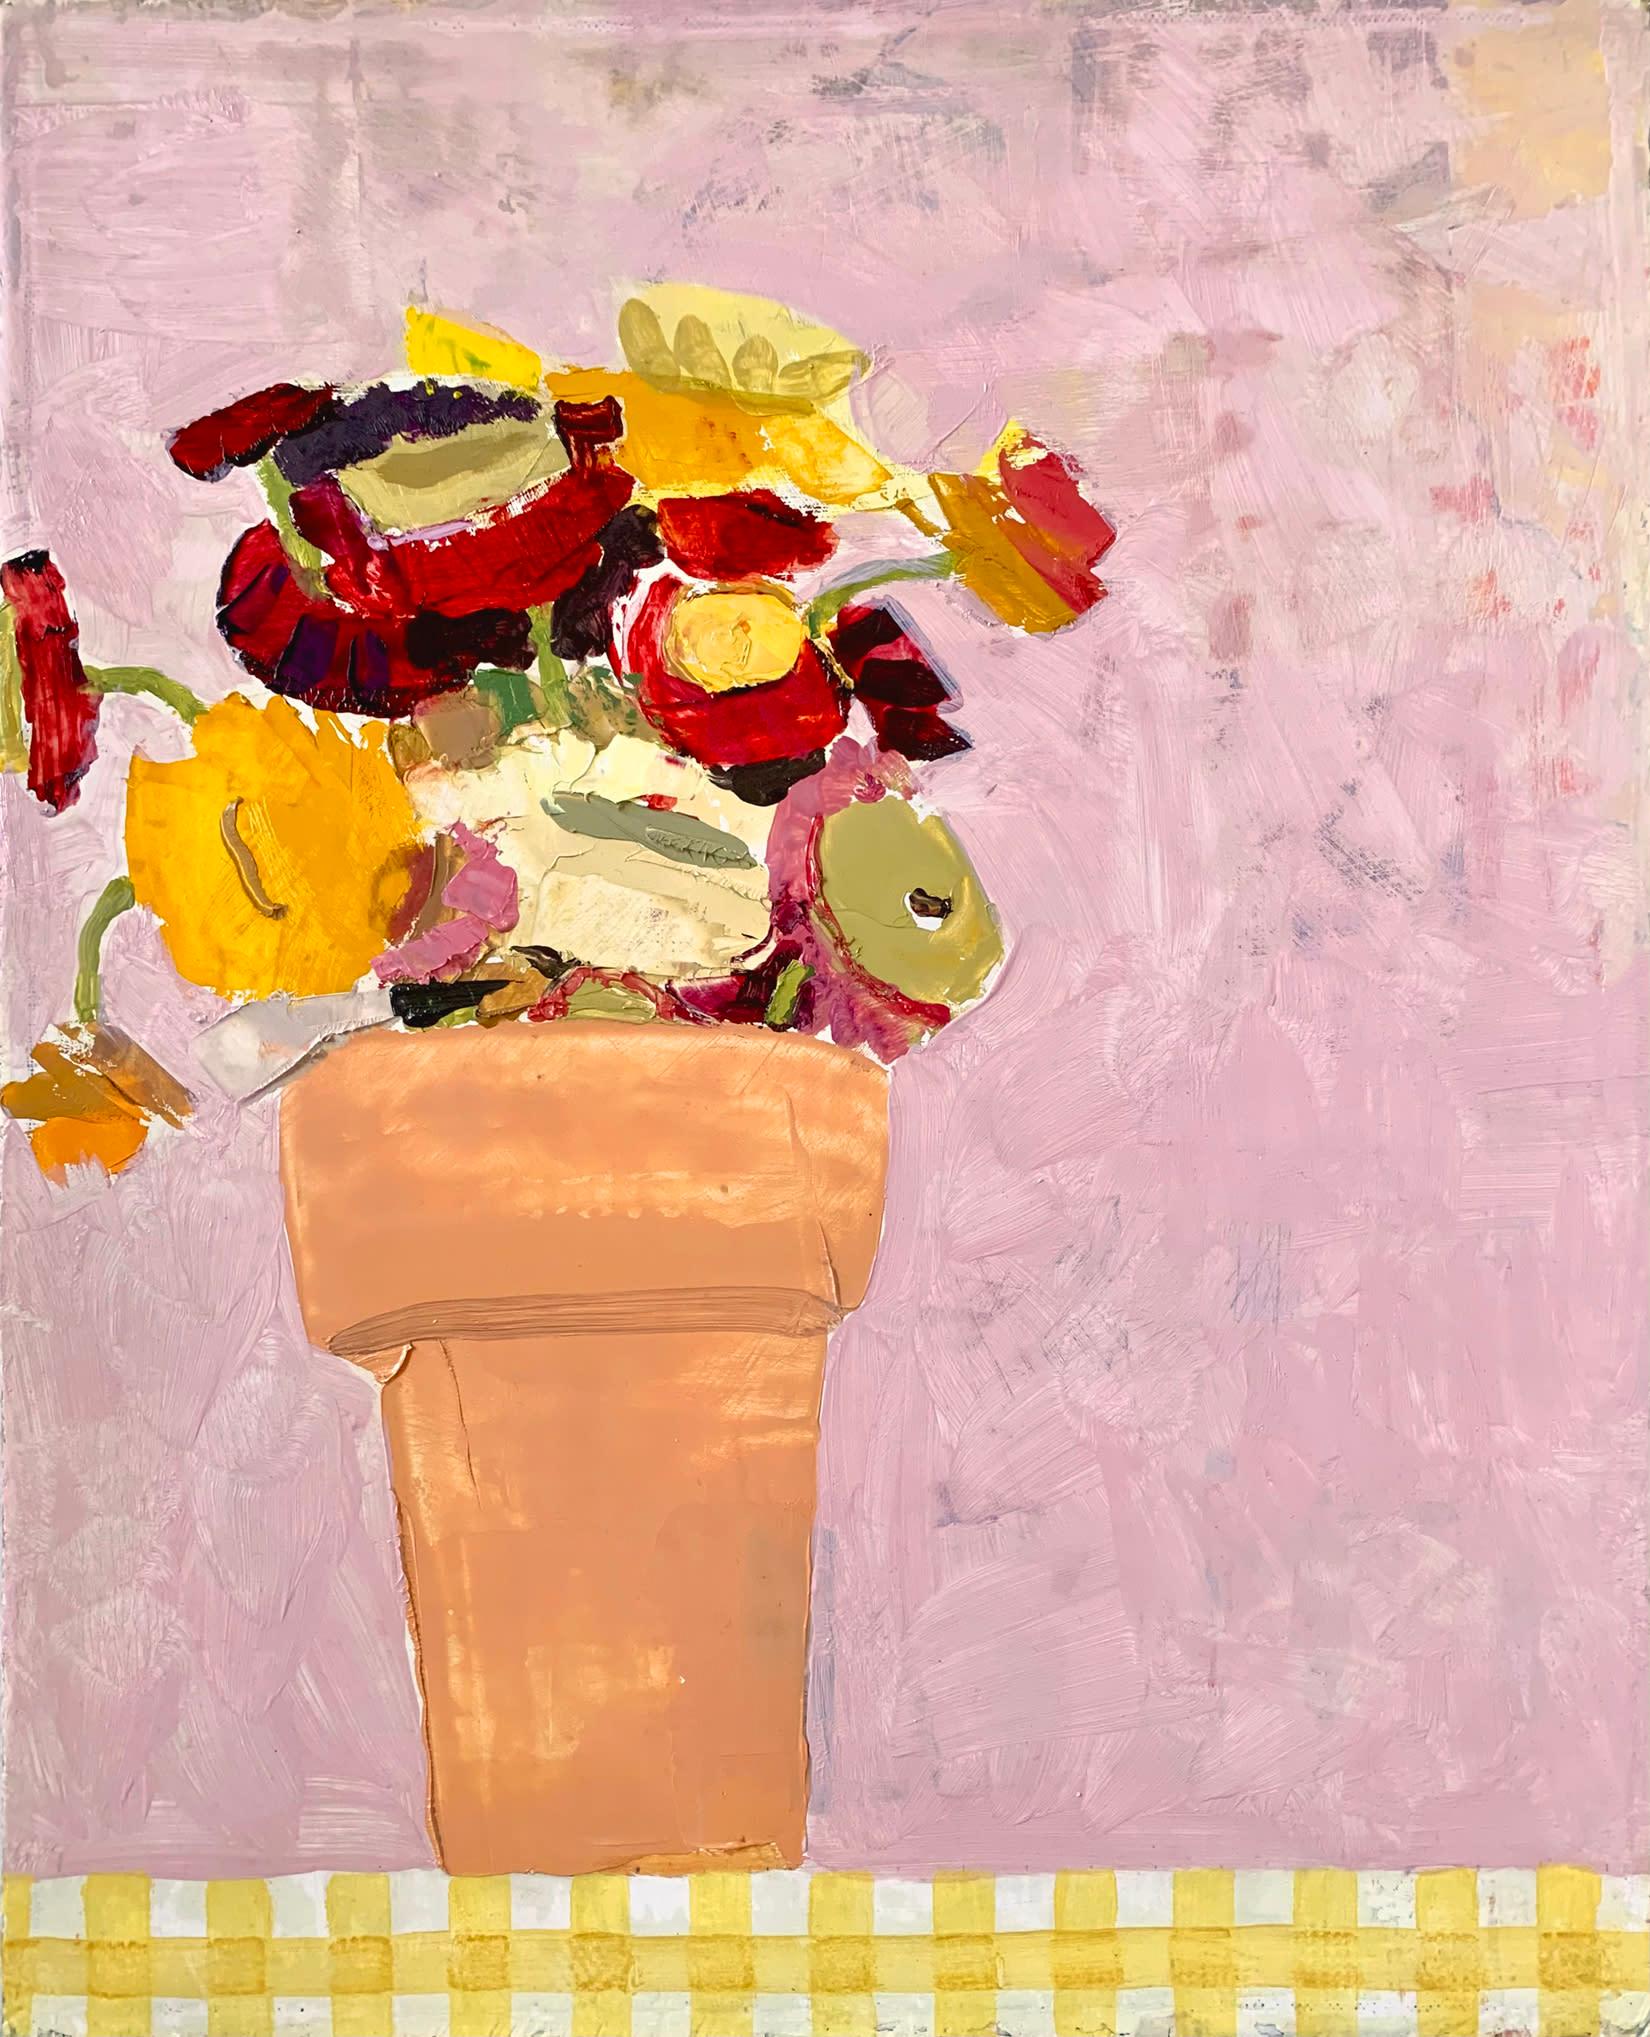 Sydney Licht "Still Life with Strawflowers" - Contemporary Oil Painting on Linen